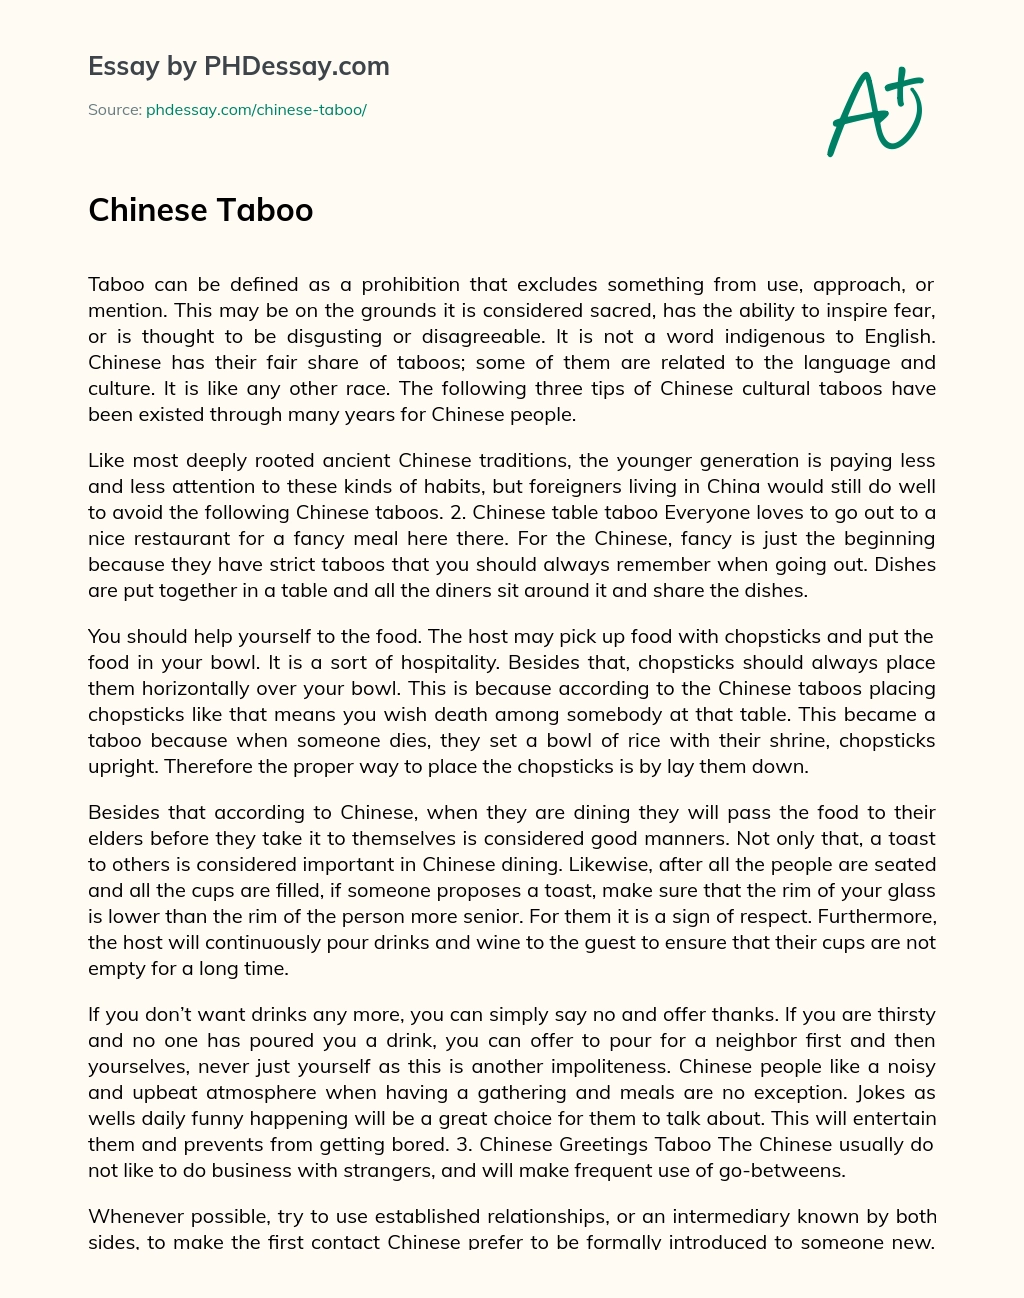 Chinese Taboo essay